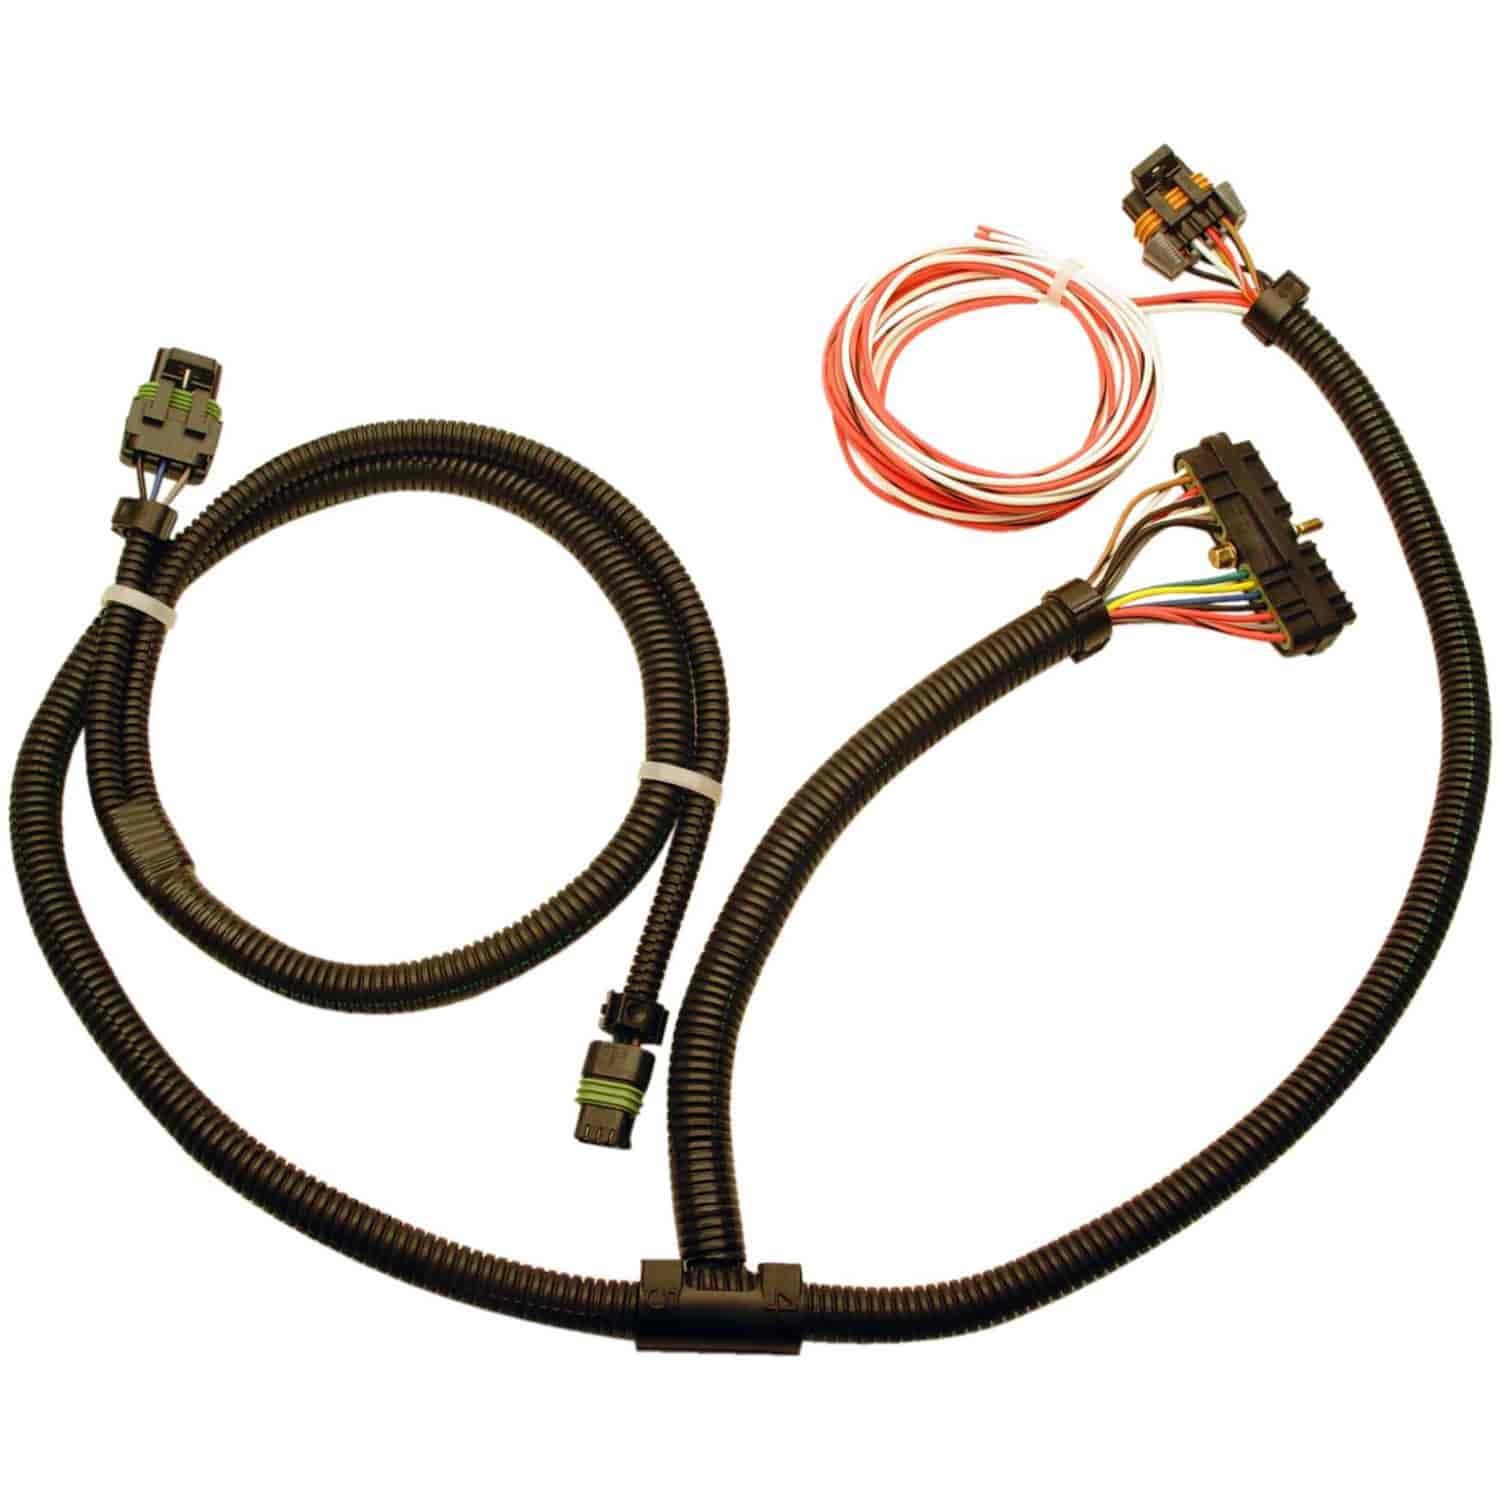 IGN ADAPTER HARNESS BUICK V6 EARLY